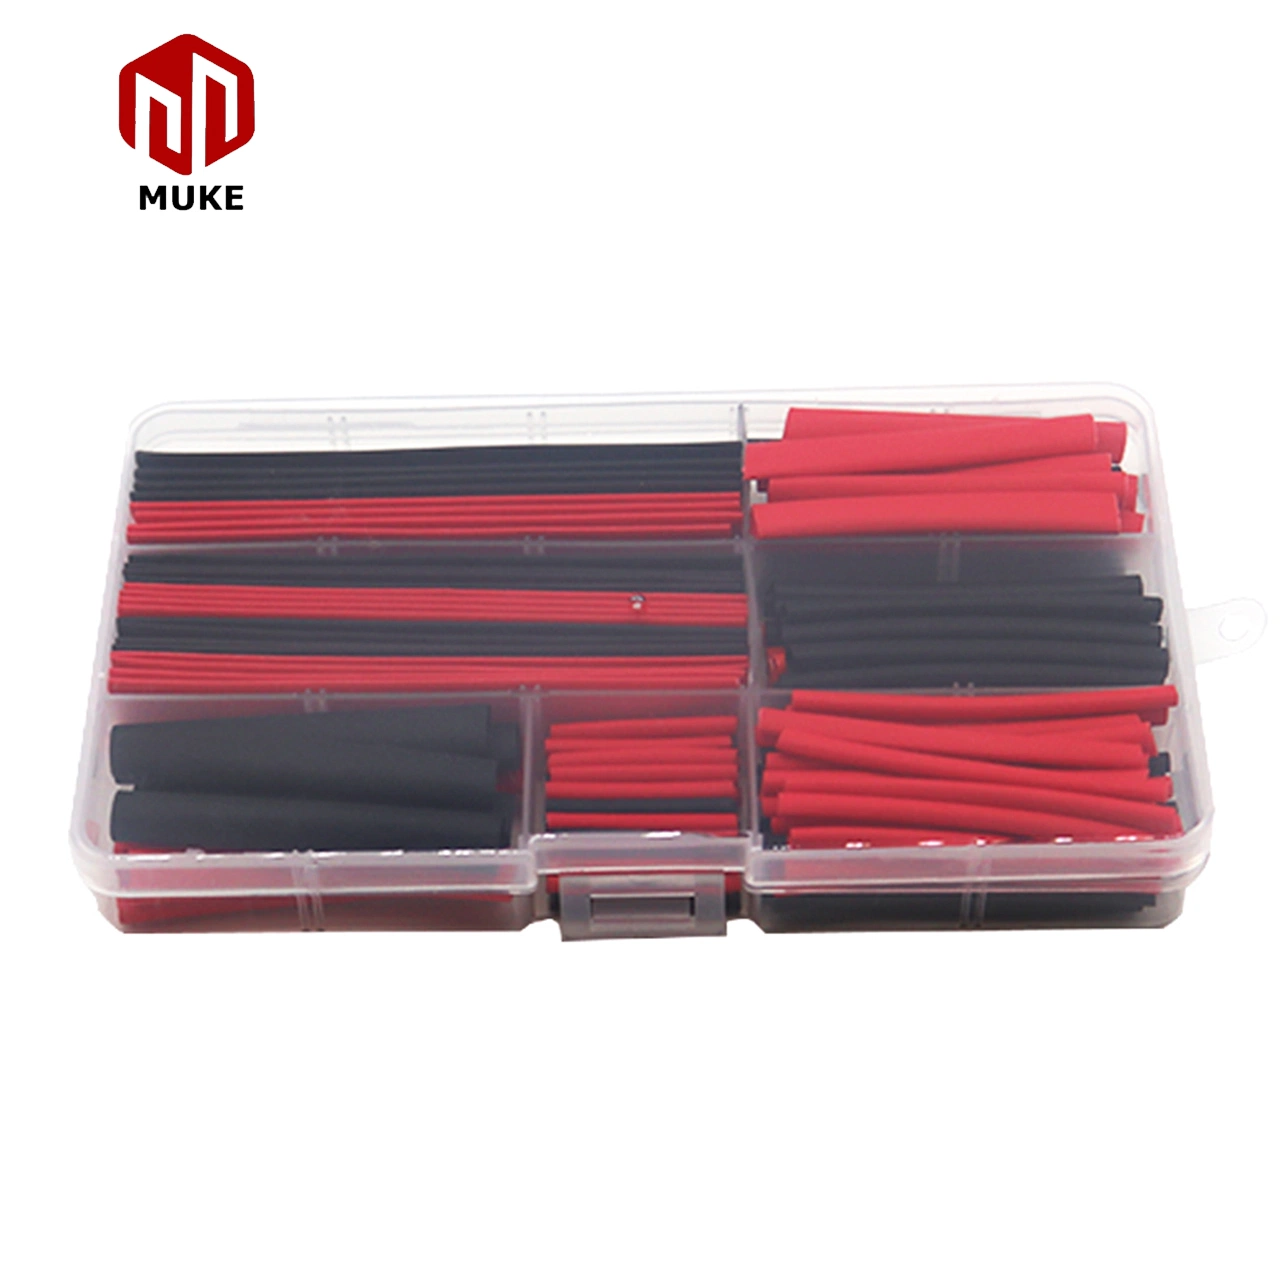 2: 1 Eventronic Electrical Wire Cable Wrap Assortment Heat Shrink Tubing